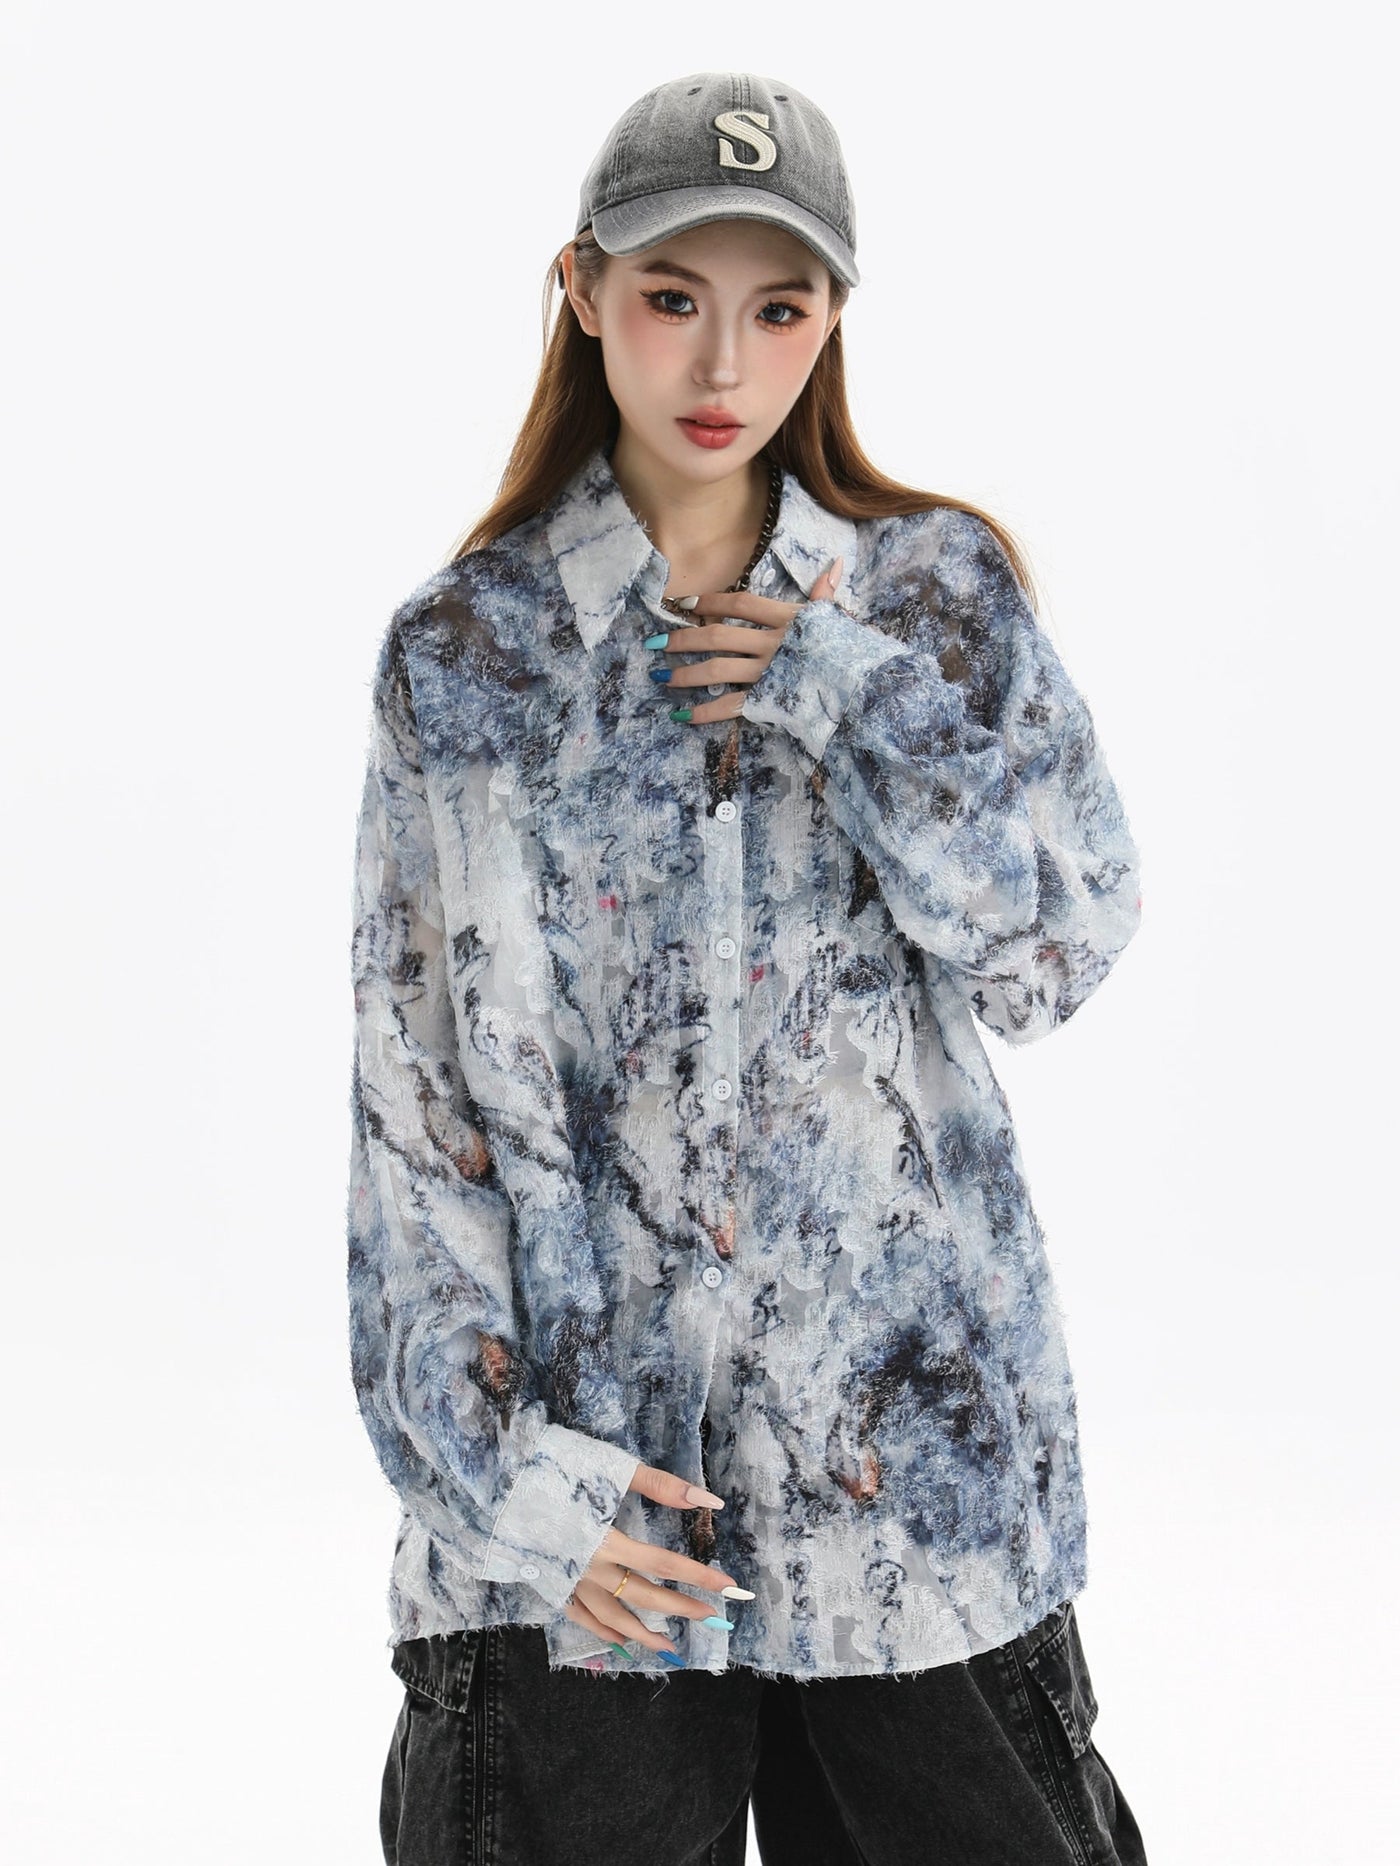 Distressed Textures Abstract Shirt Korean Street Fashion Shirt By INS Korea Shop Online at OH Vault